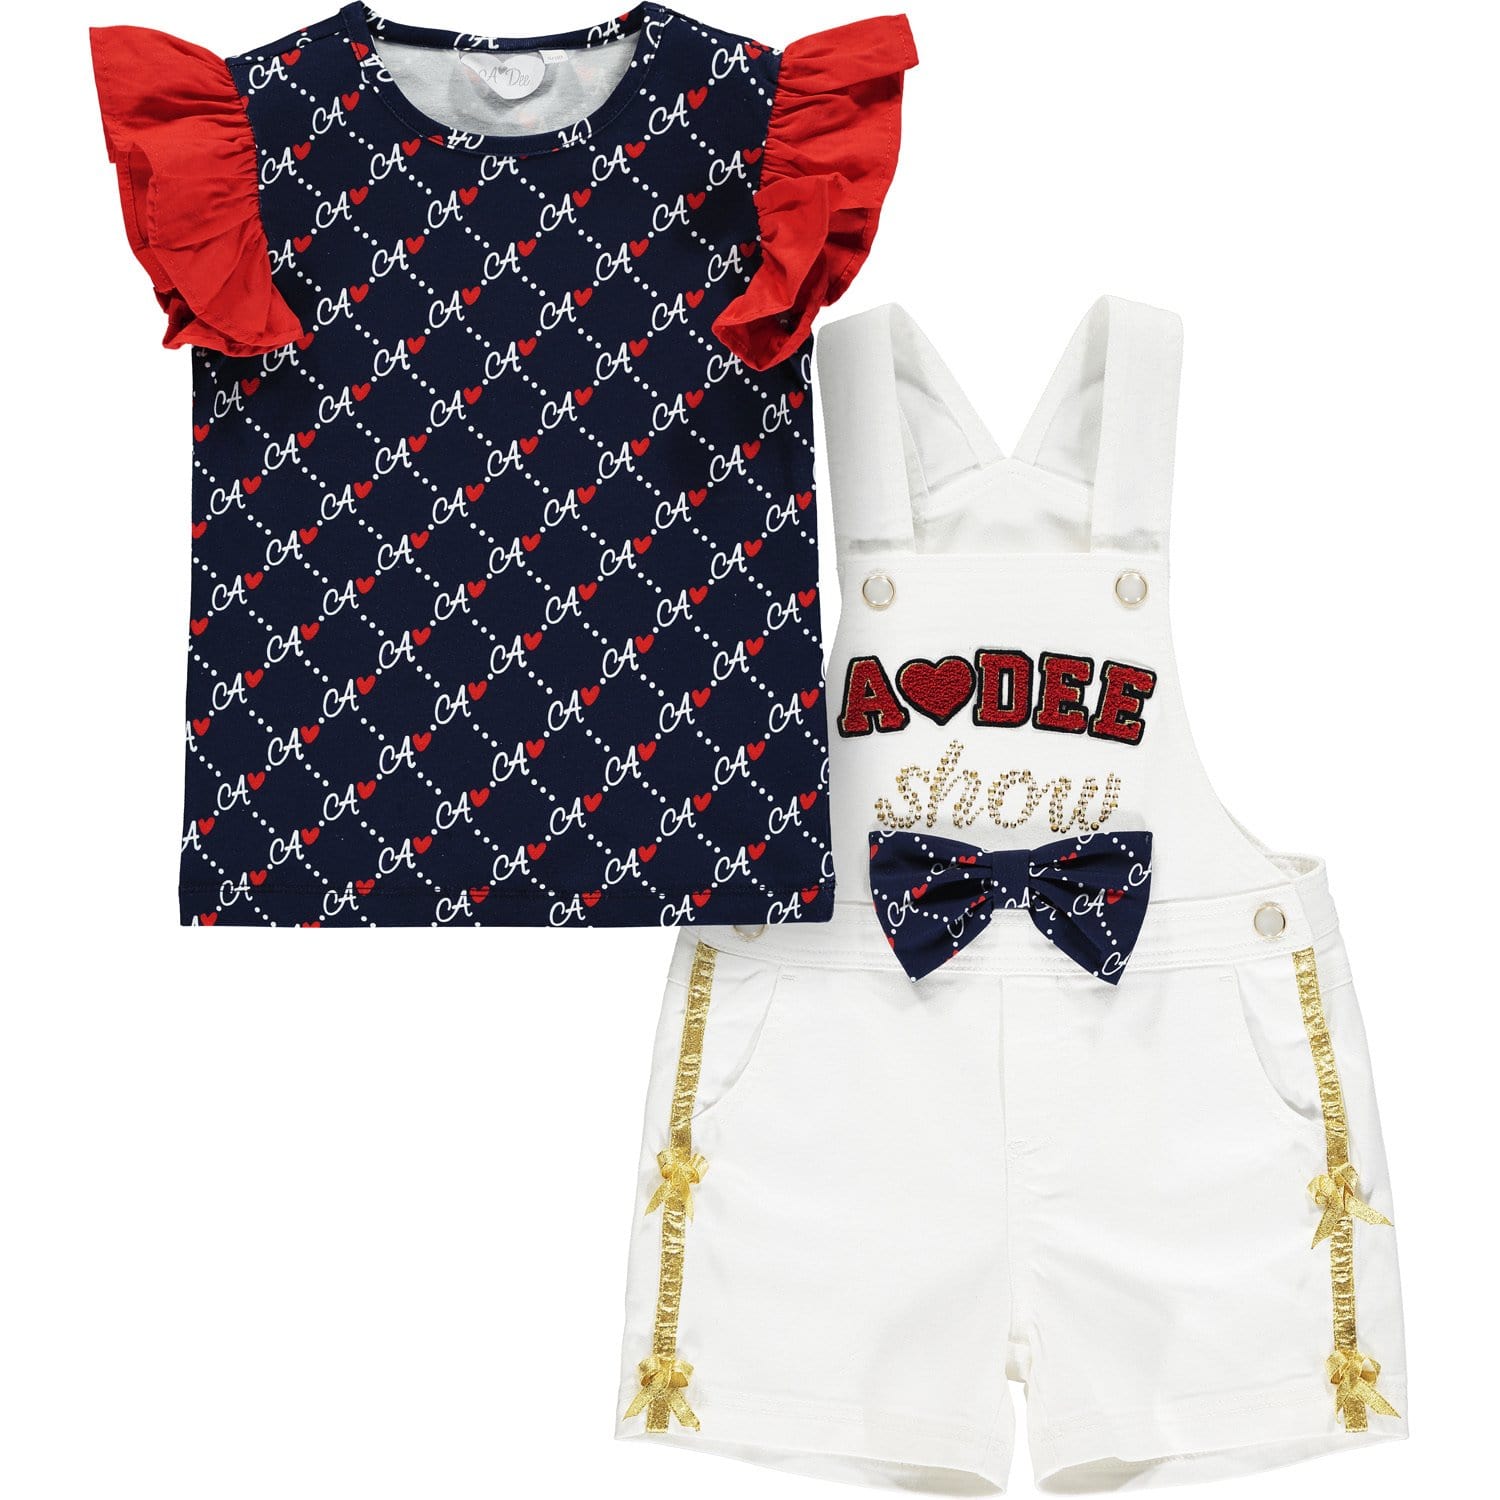 A DEE - Denim Dungaree Two Piece Set - Navy/White